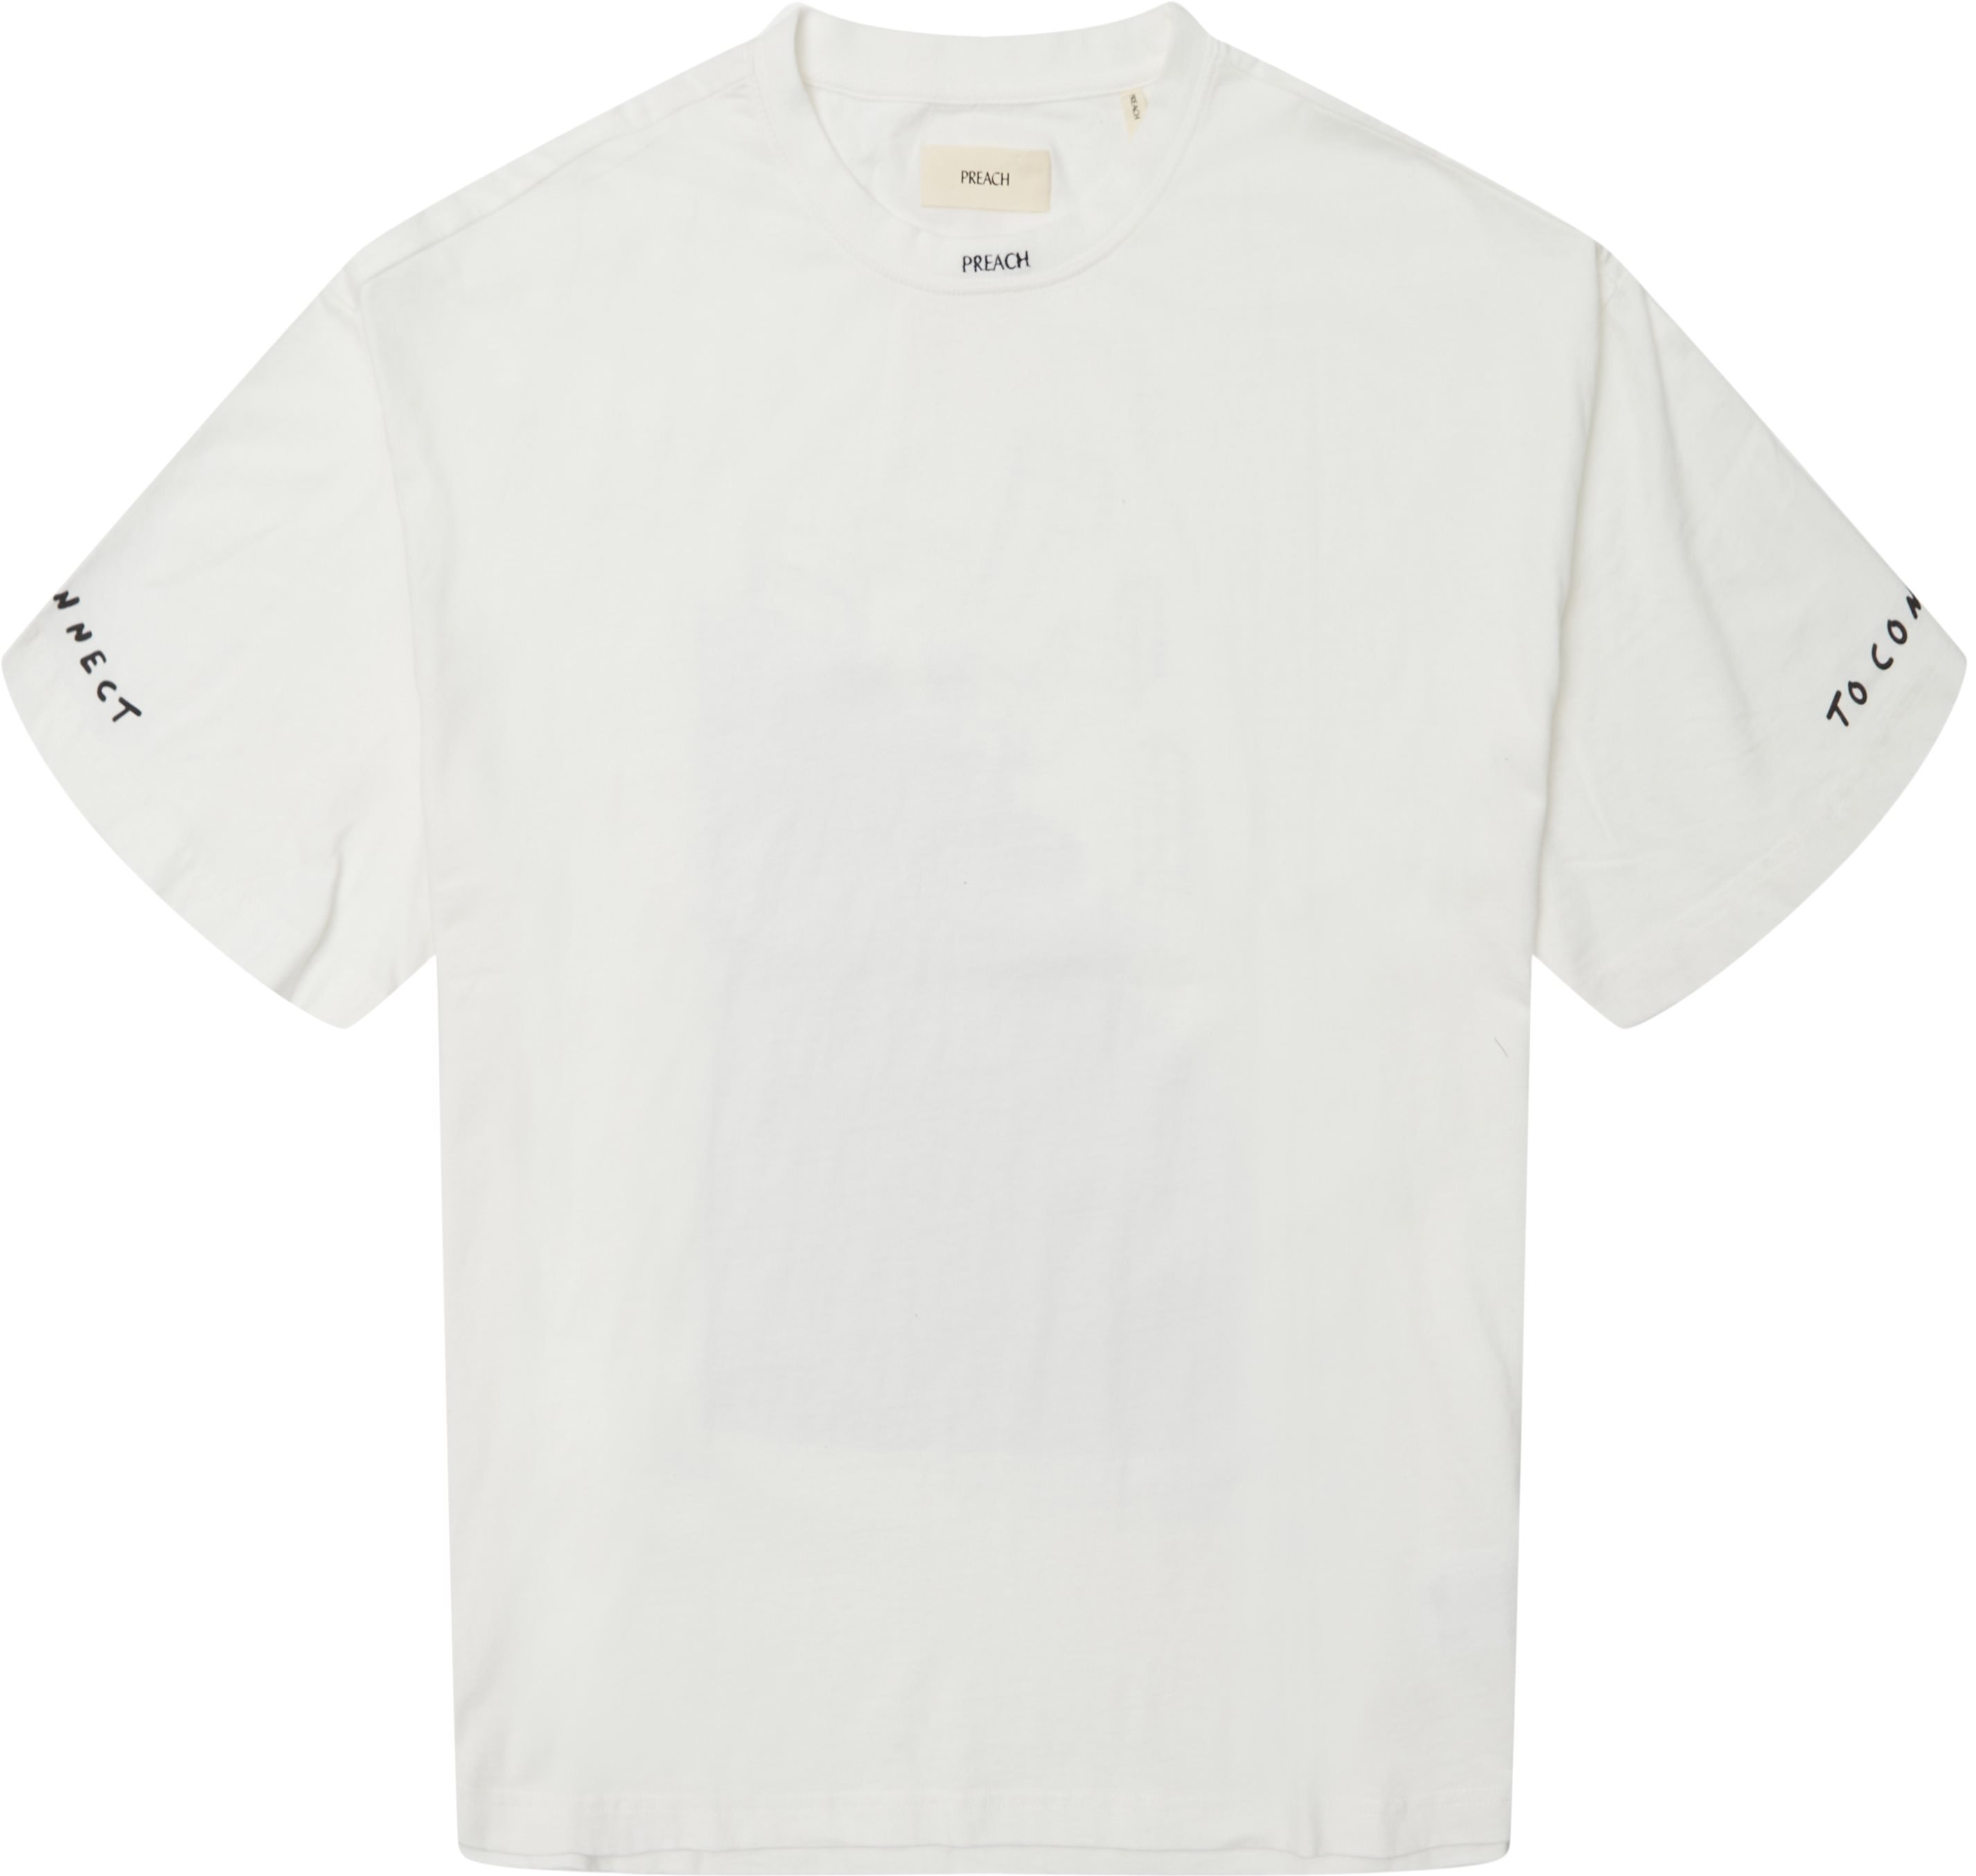 Spinkled Utopia Tee - T-shirts - Regular fit - White